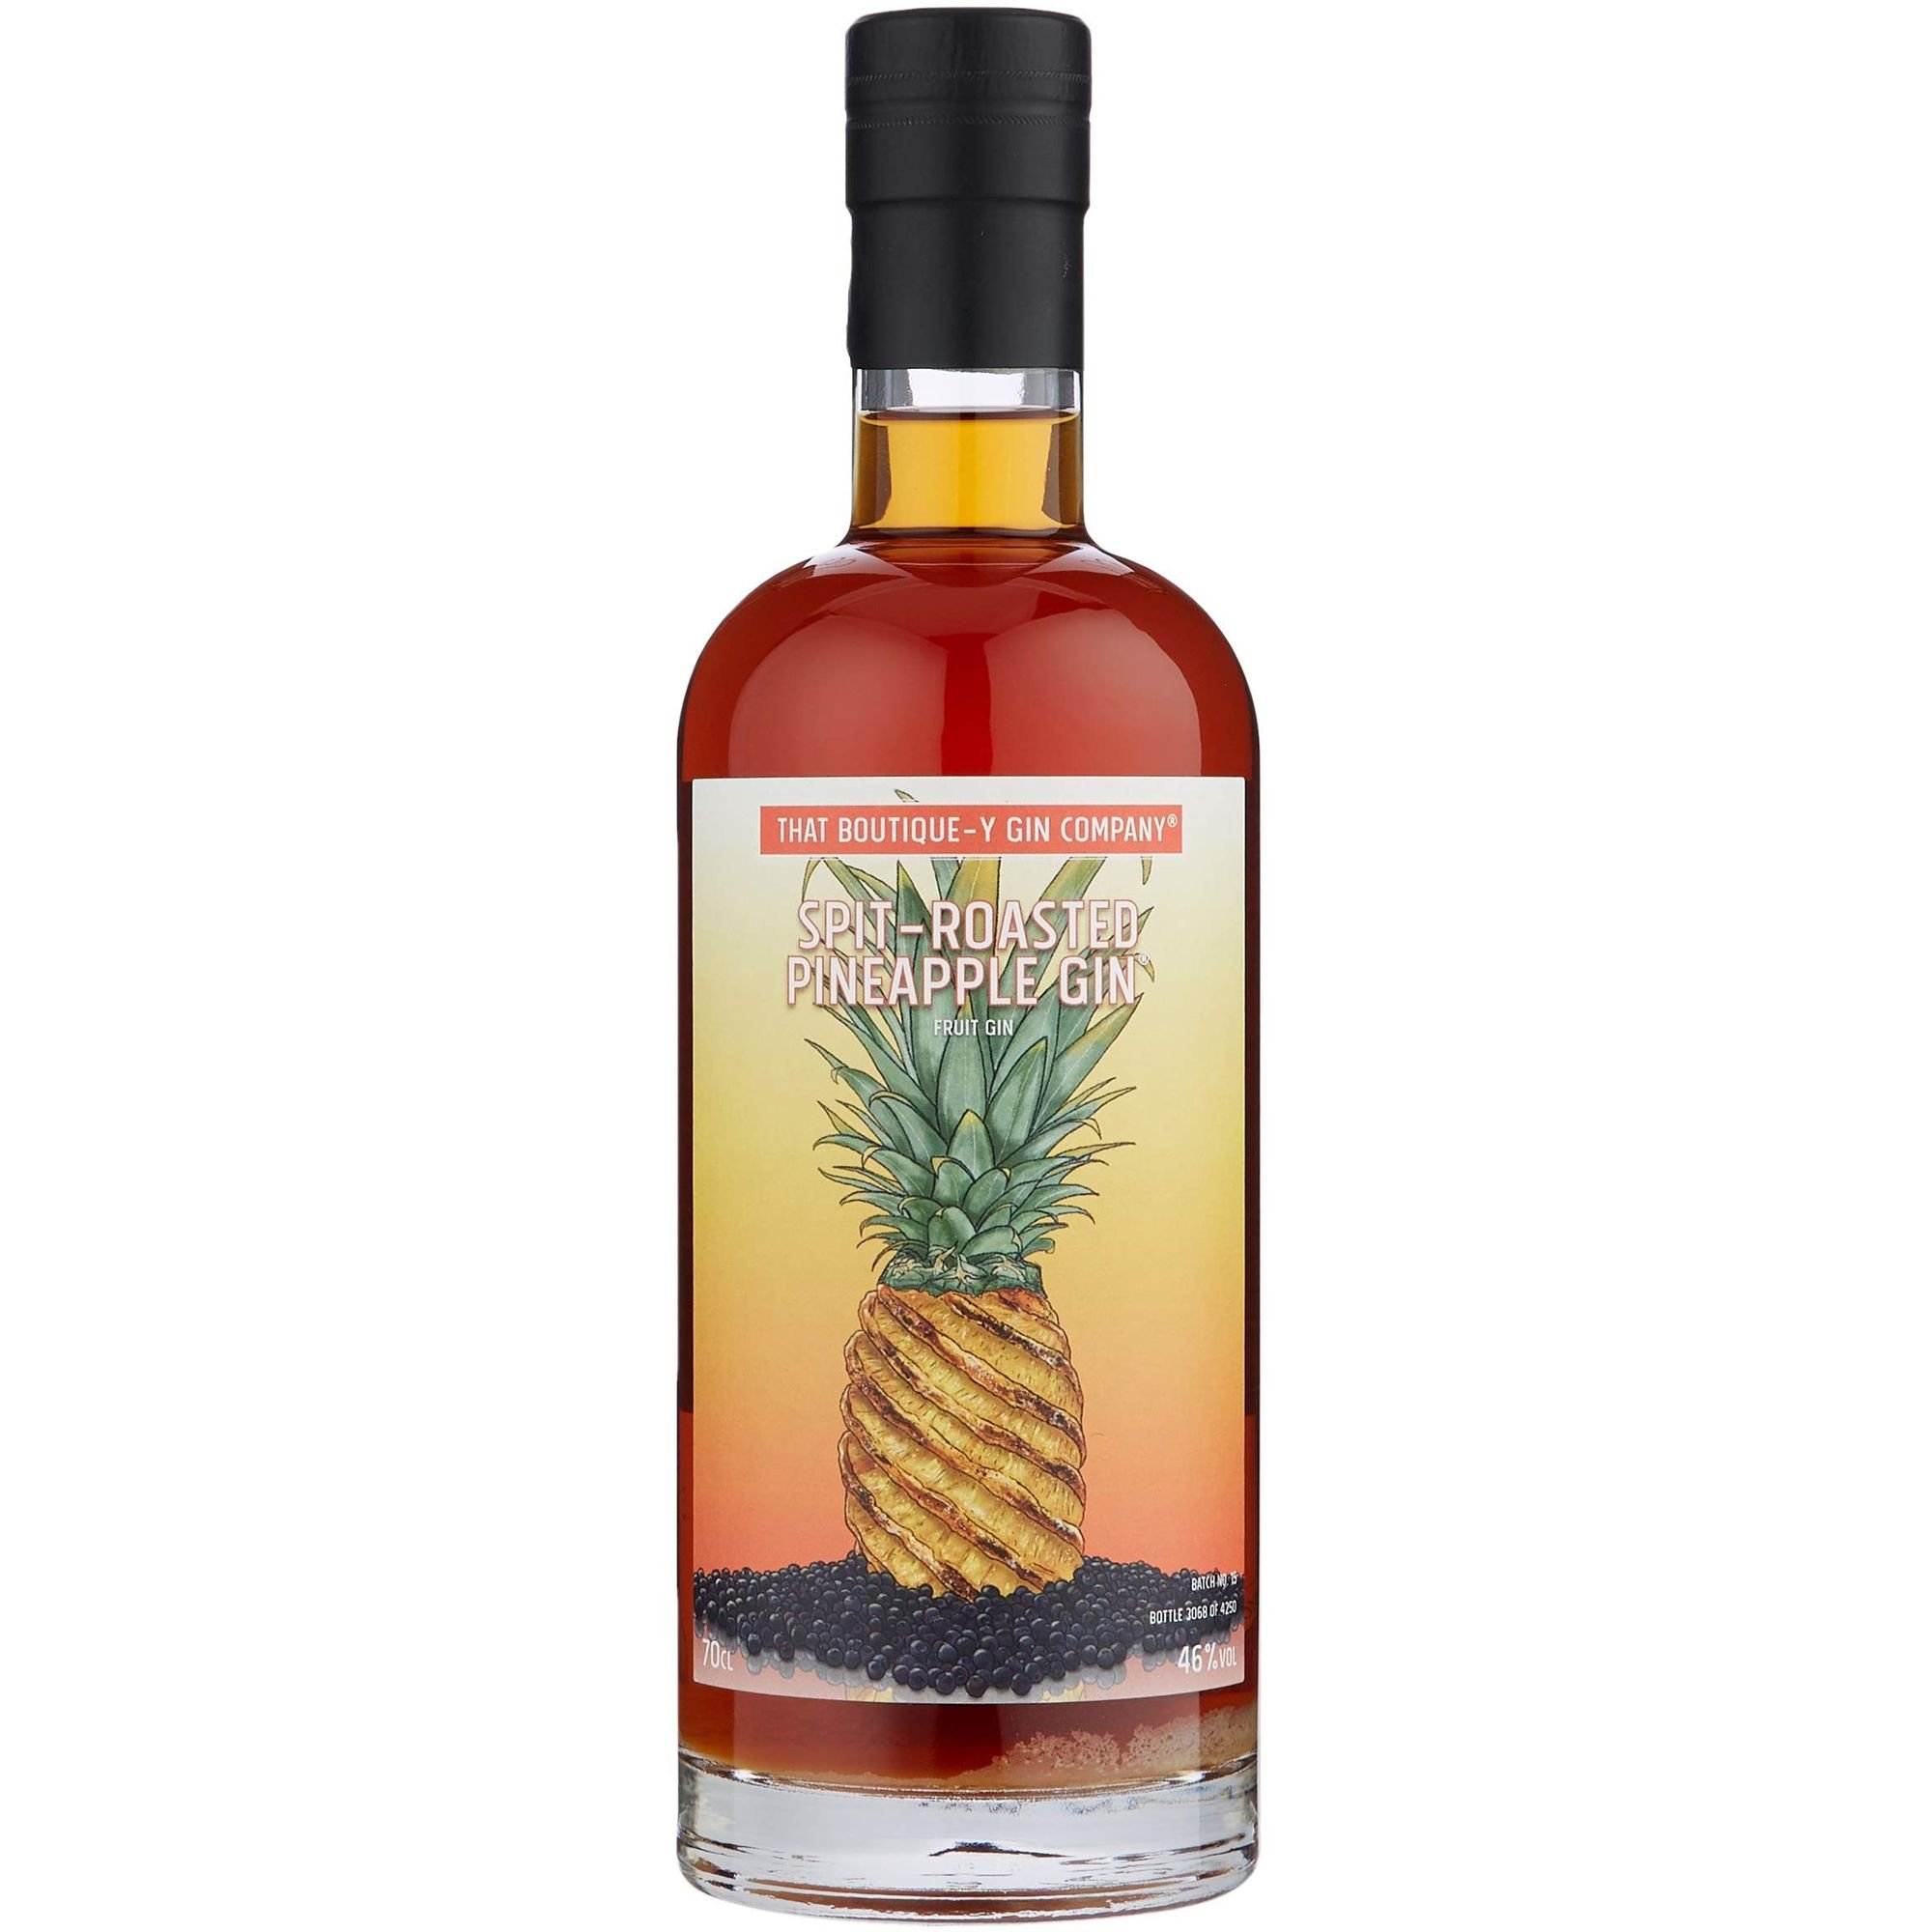 Джин That Boutique-Y Gin Company Spit-Roasted Pineapple Gin 46% 0.7 л - фото 1